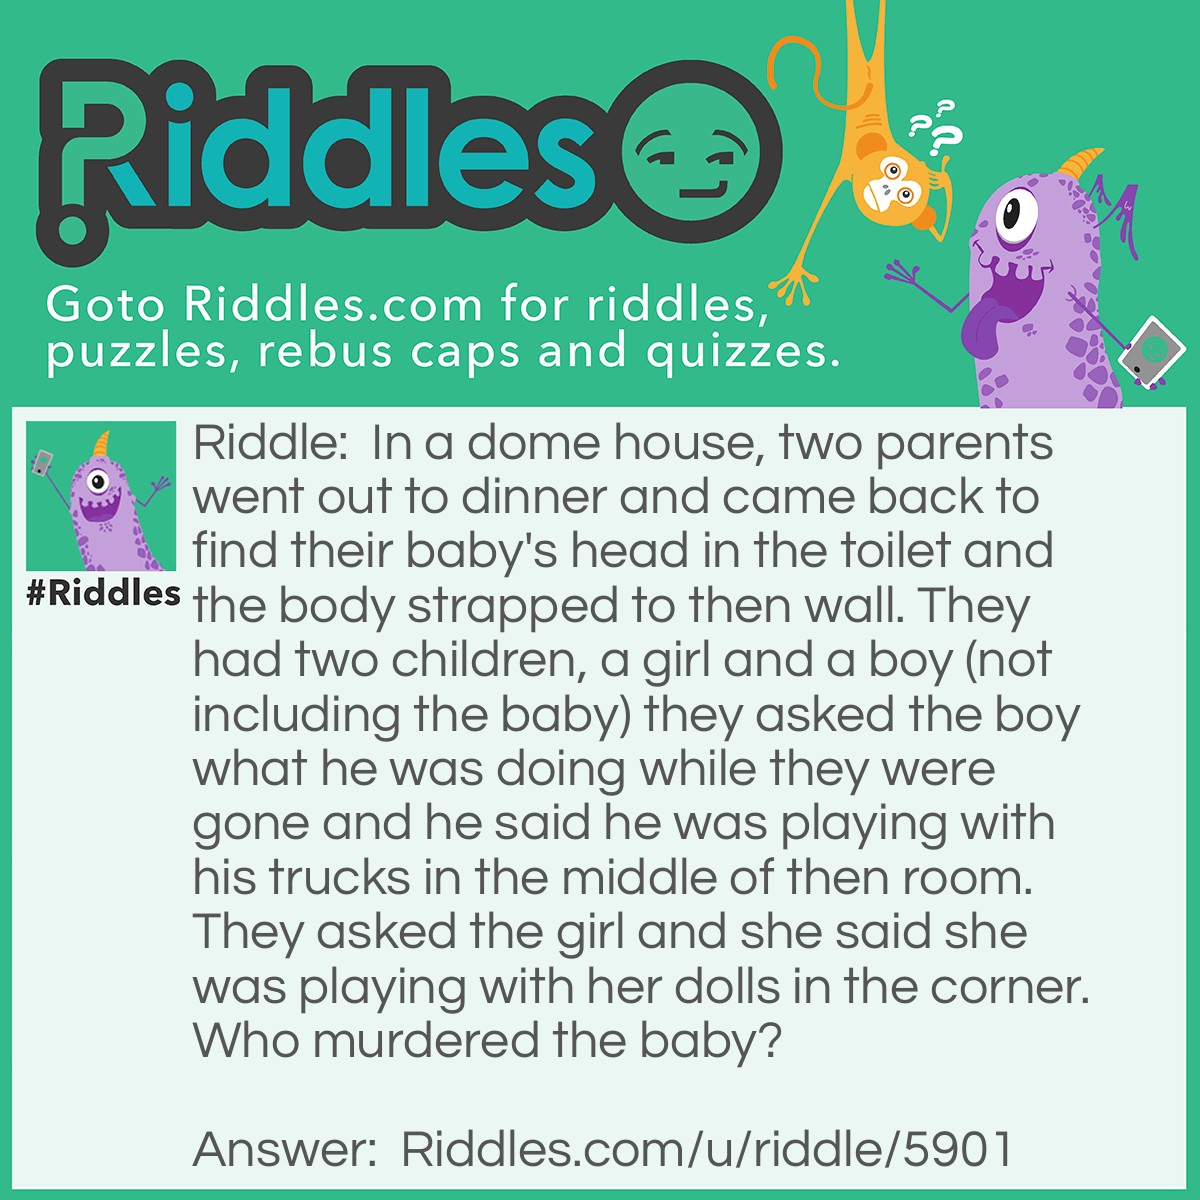 Riddle: In a dome house, two parents went out to dinner and came back to find their baby's head in the toilet and the body strapped to then wall. They had two children, a girl and a boy (not including the baby) they asked the boy what he was doing while they were gone and he said he was playing with his trucks in the middle of then room. They asked the girl and she said she was playing with her dolls in the corner. Who murdered the baby? Answer: The girl, there is no corner in a dome house!